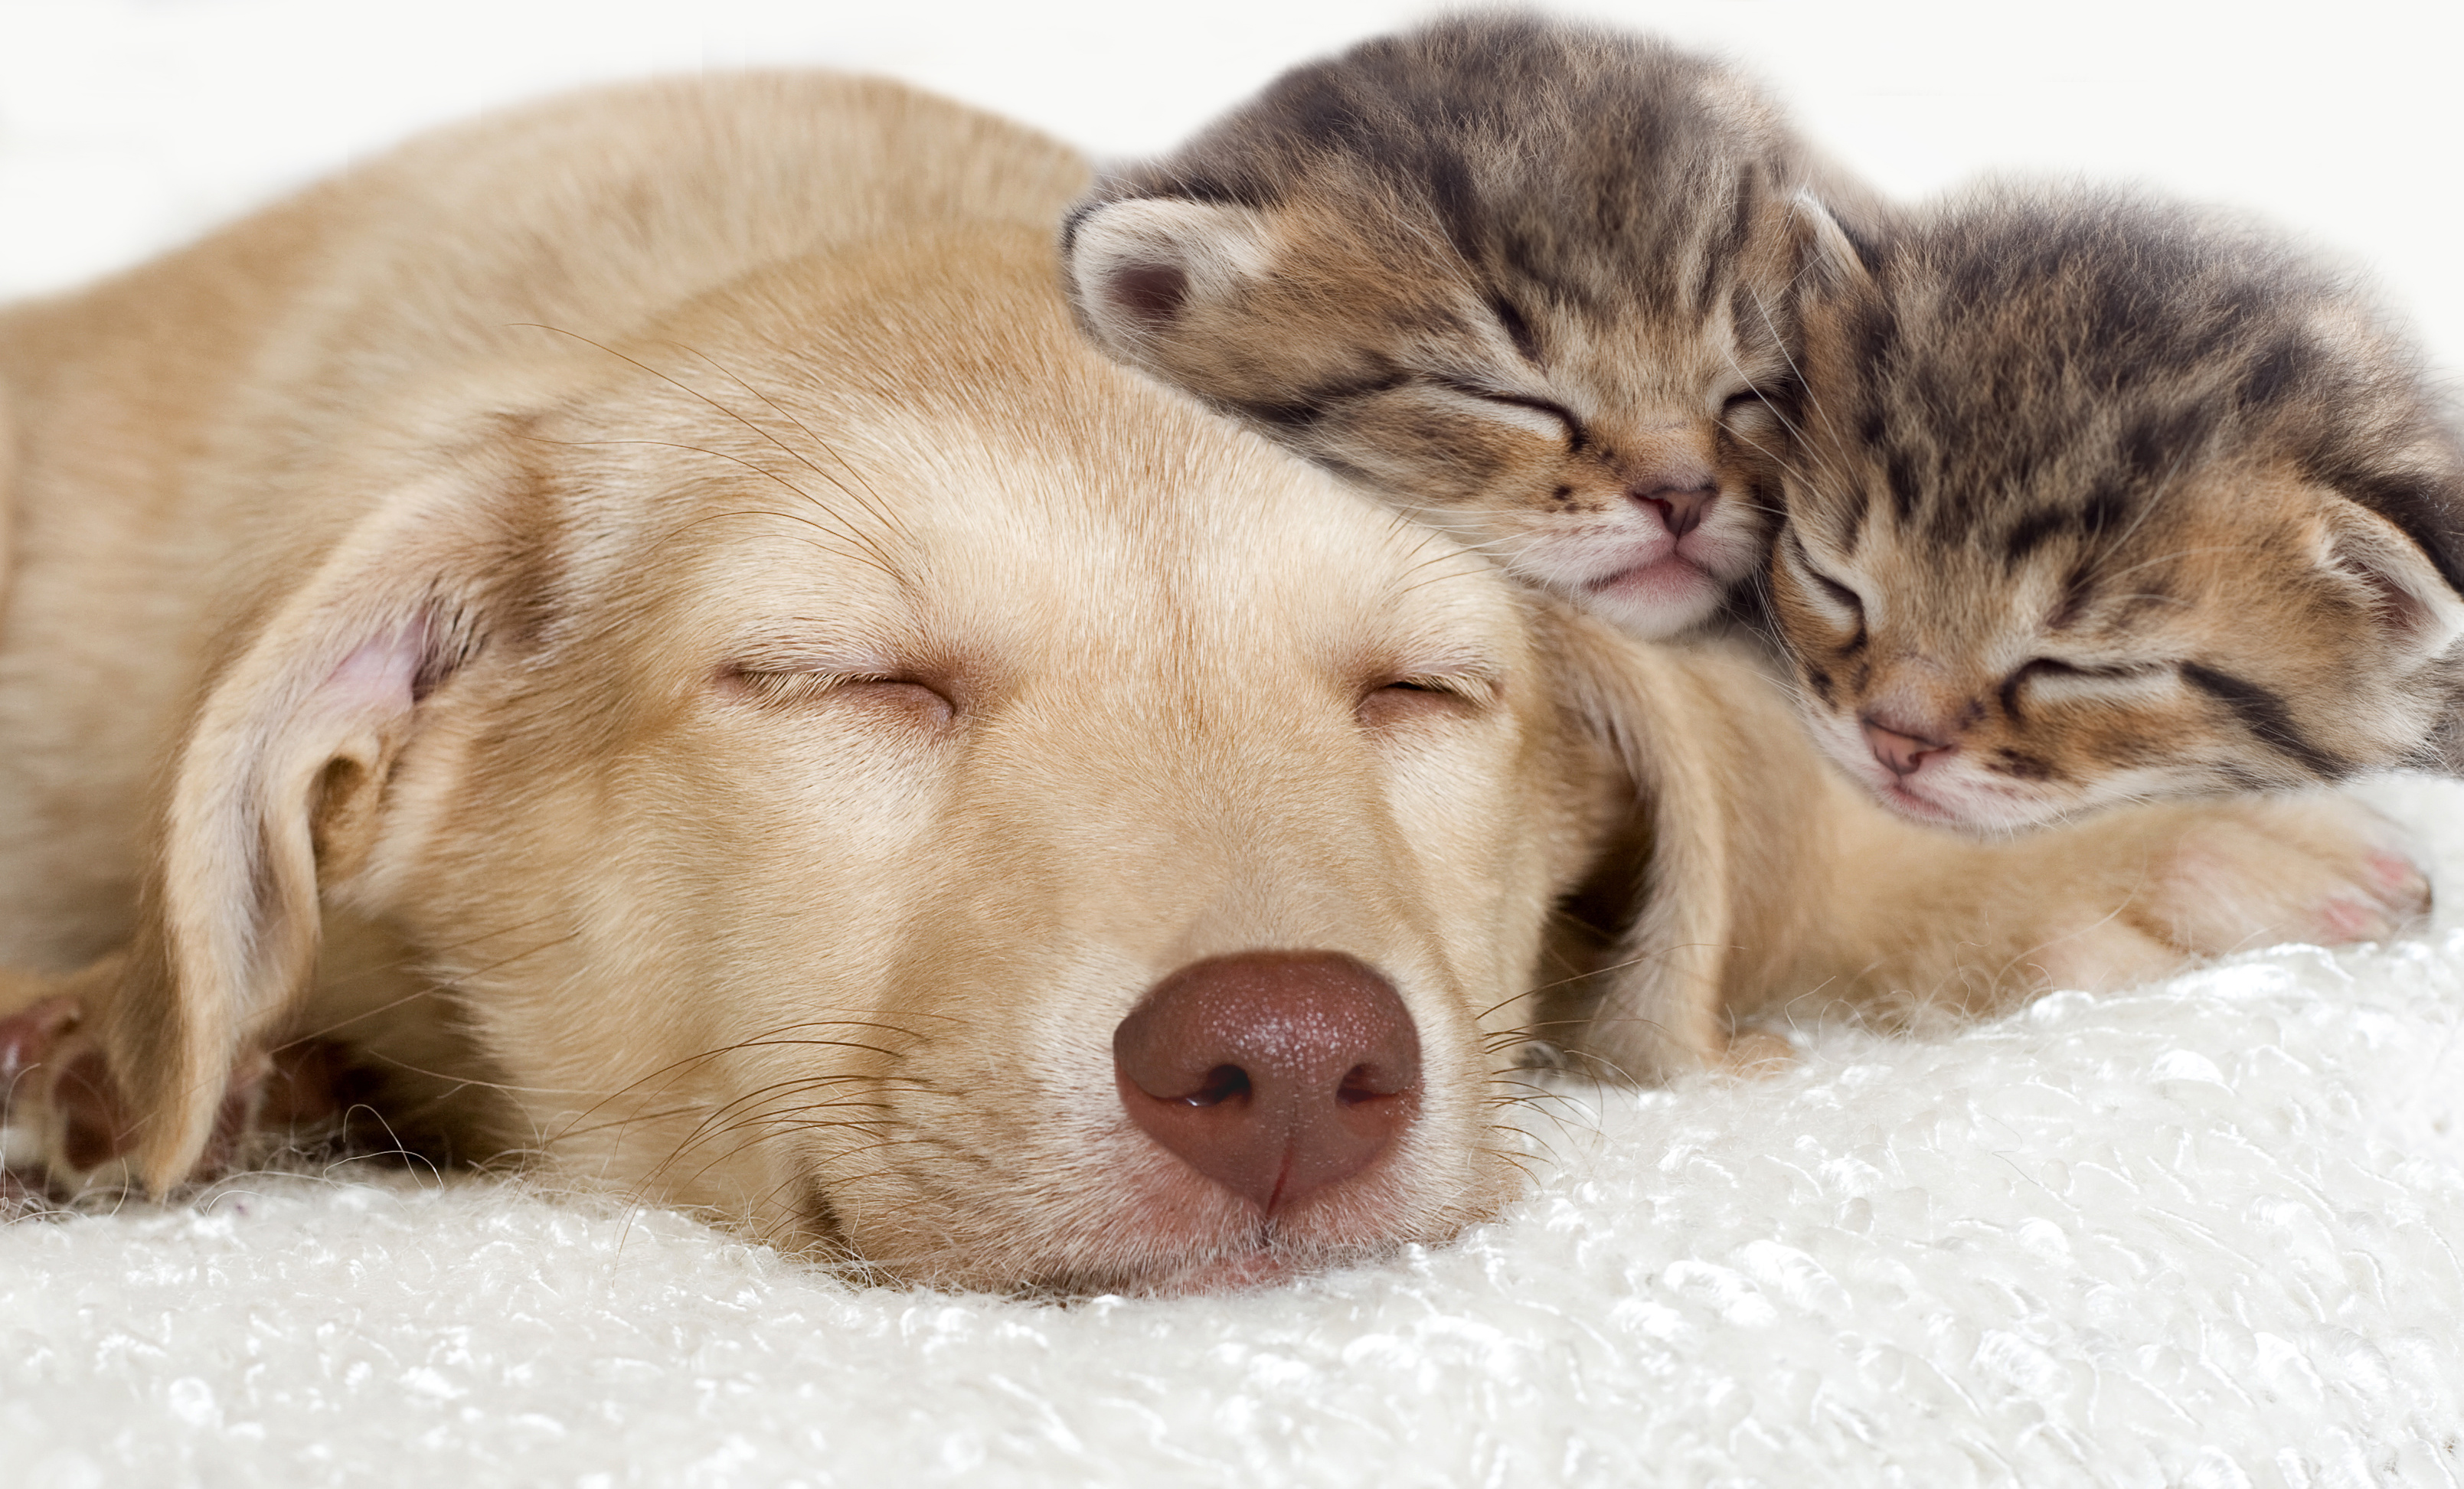  Cute  Little  Cats  and Dog Background Gallery Yopriceville 